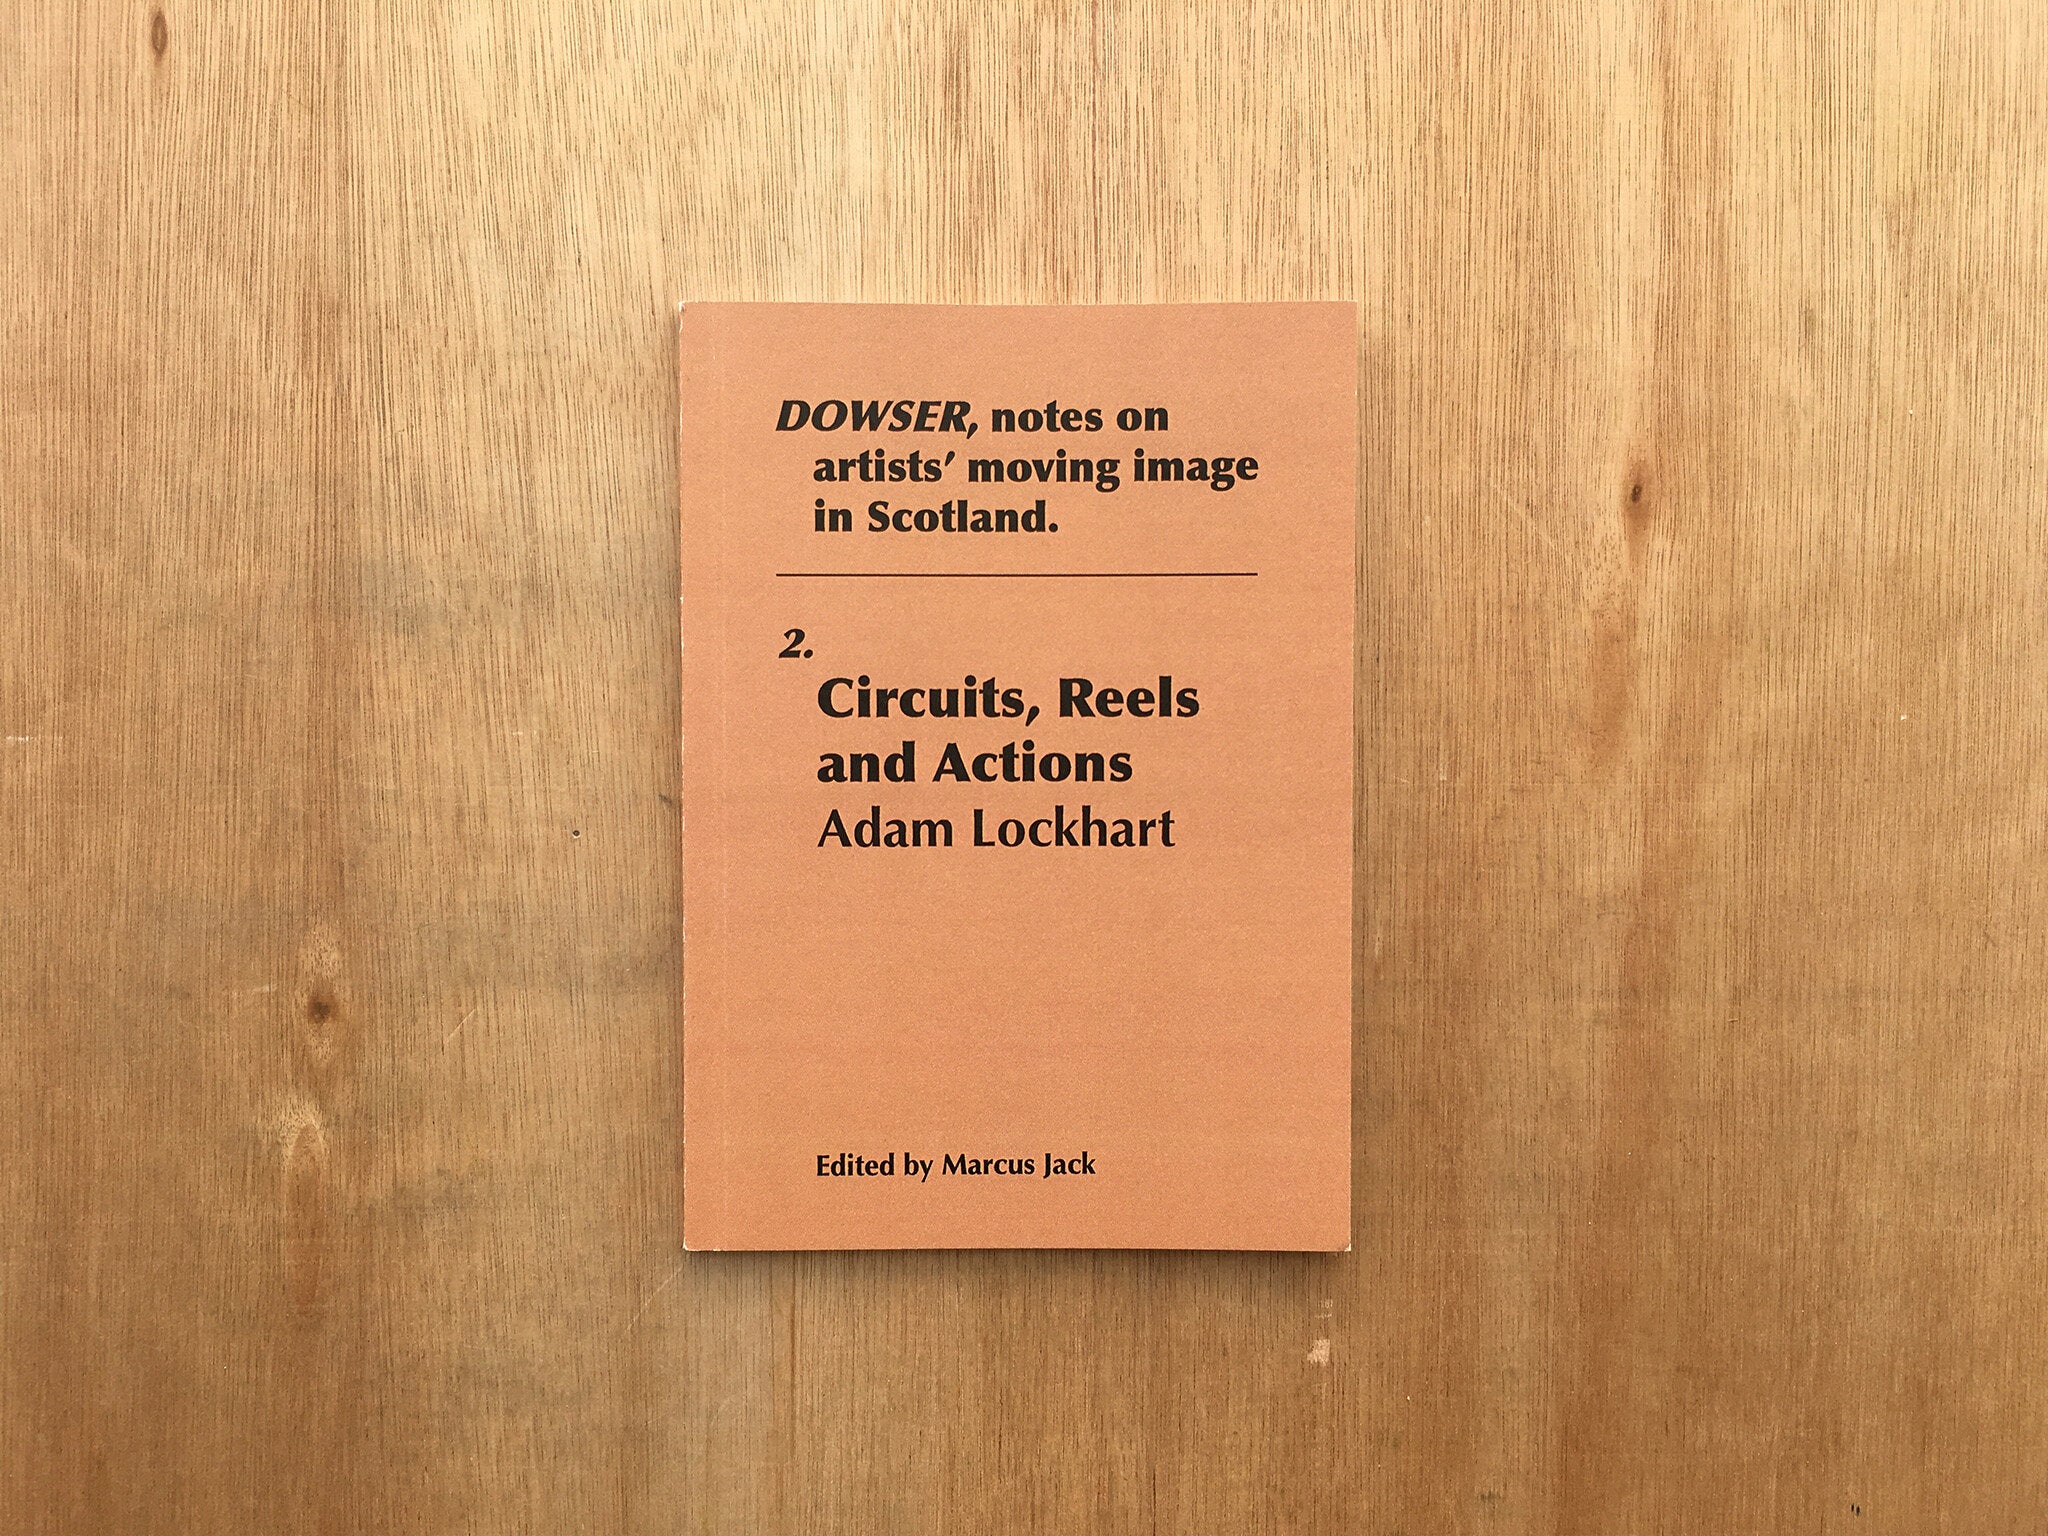 DOWSER ISSUE 2: CIRCUITS, REELS AND ACTIONS by Adam Lockhart